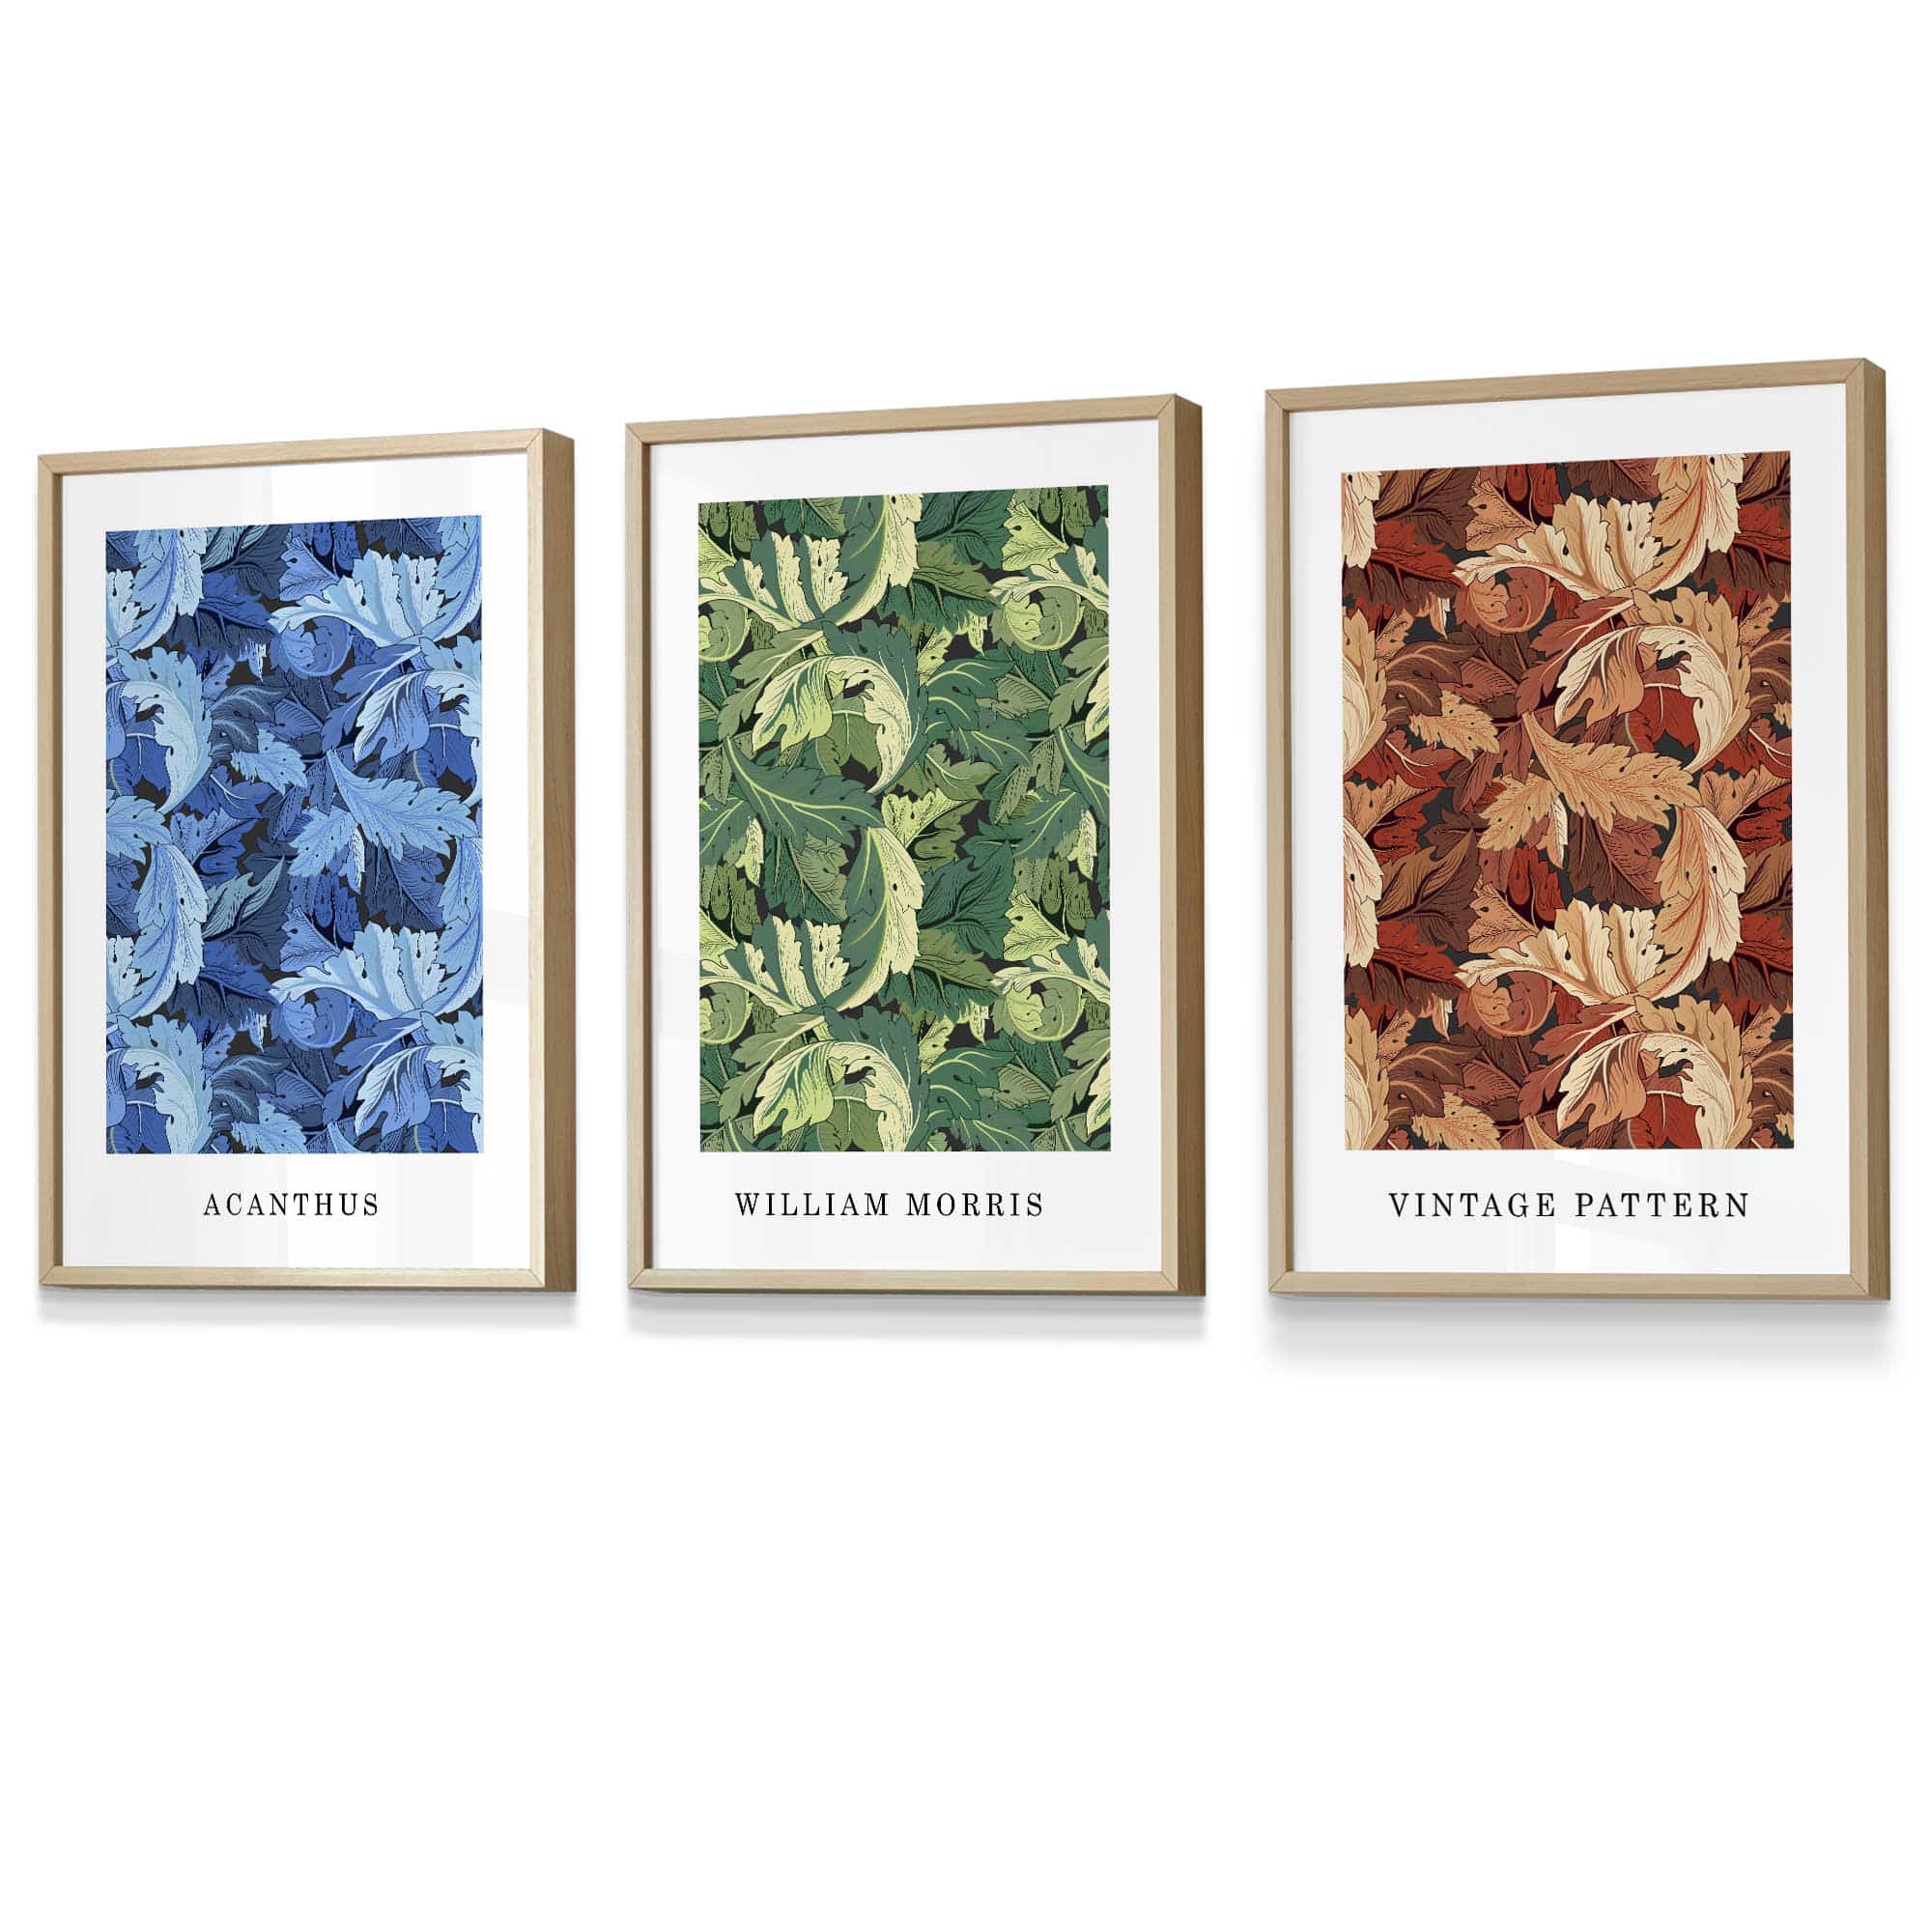 Framed William Morris Vintage Floral Wall Art in Blue Green and Tan | Artze Wall Art UK